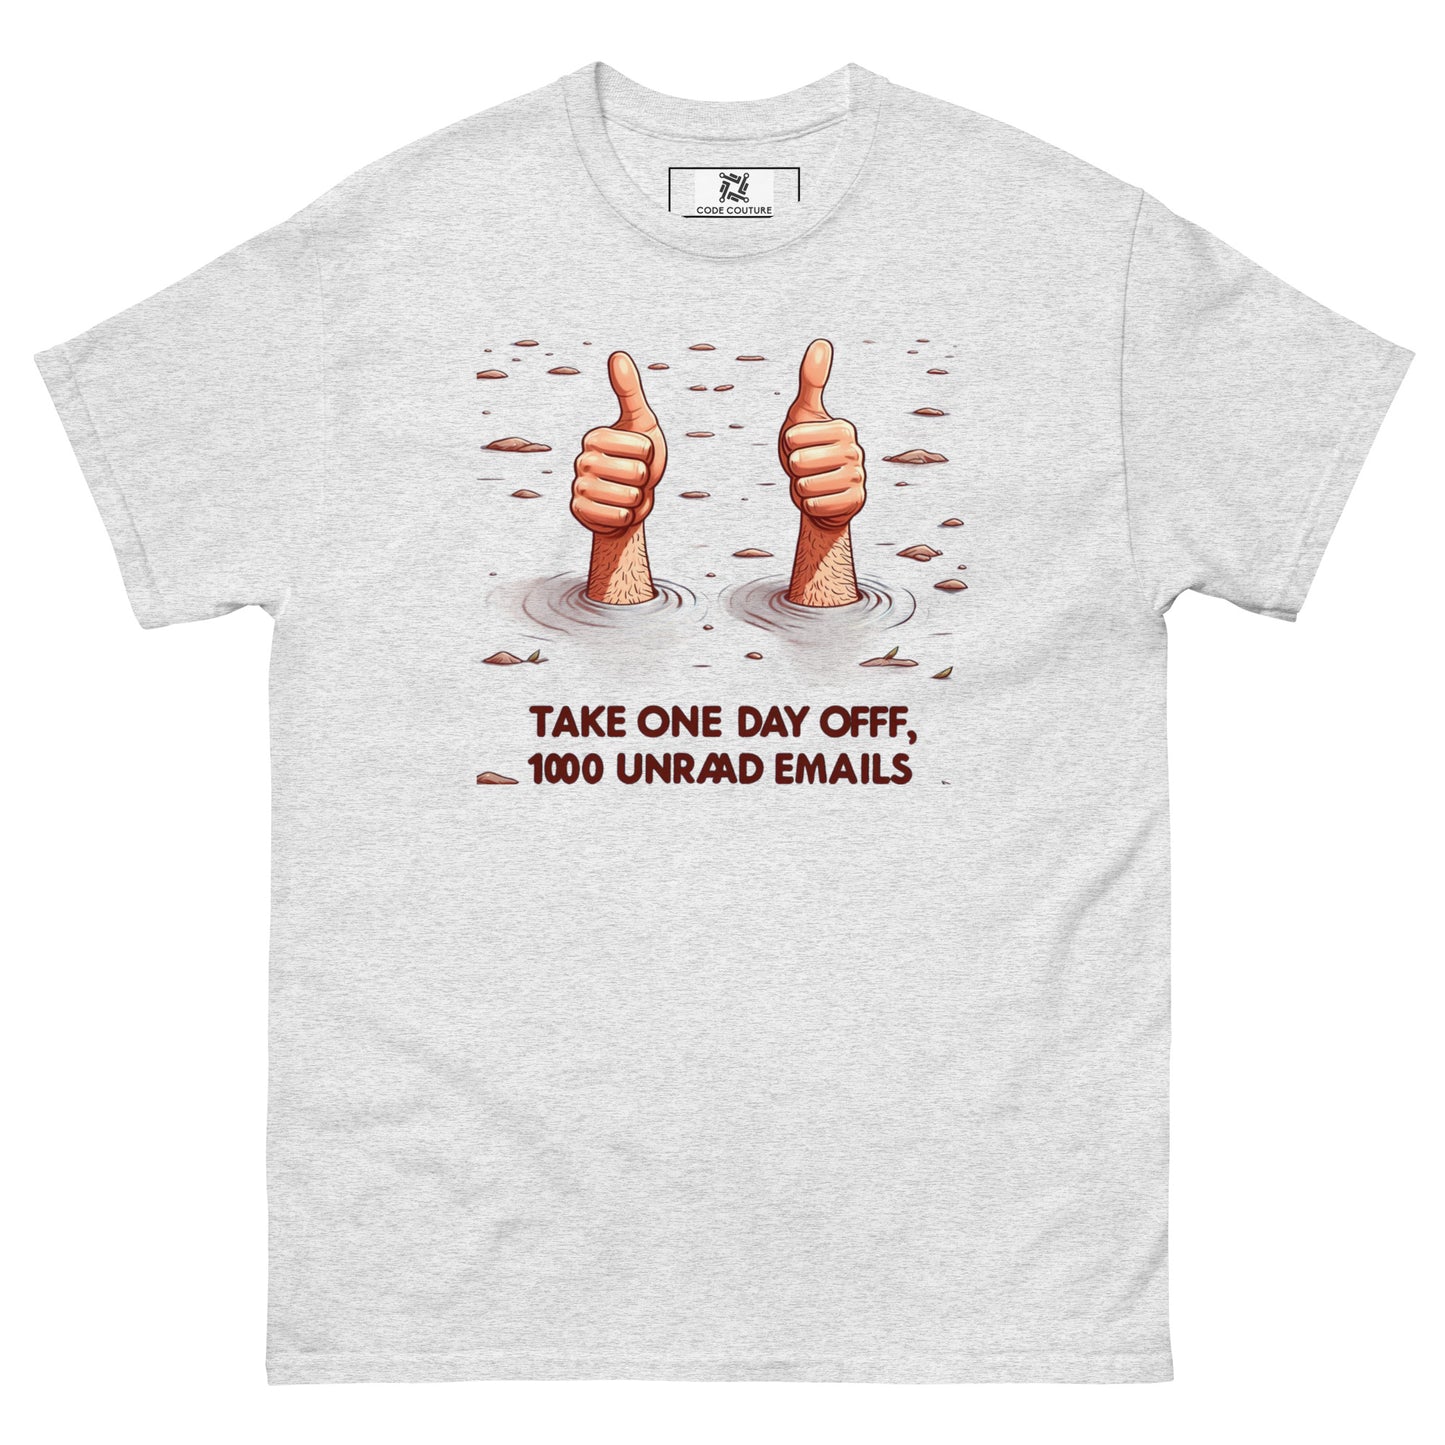 Take a Day Off tee